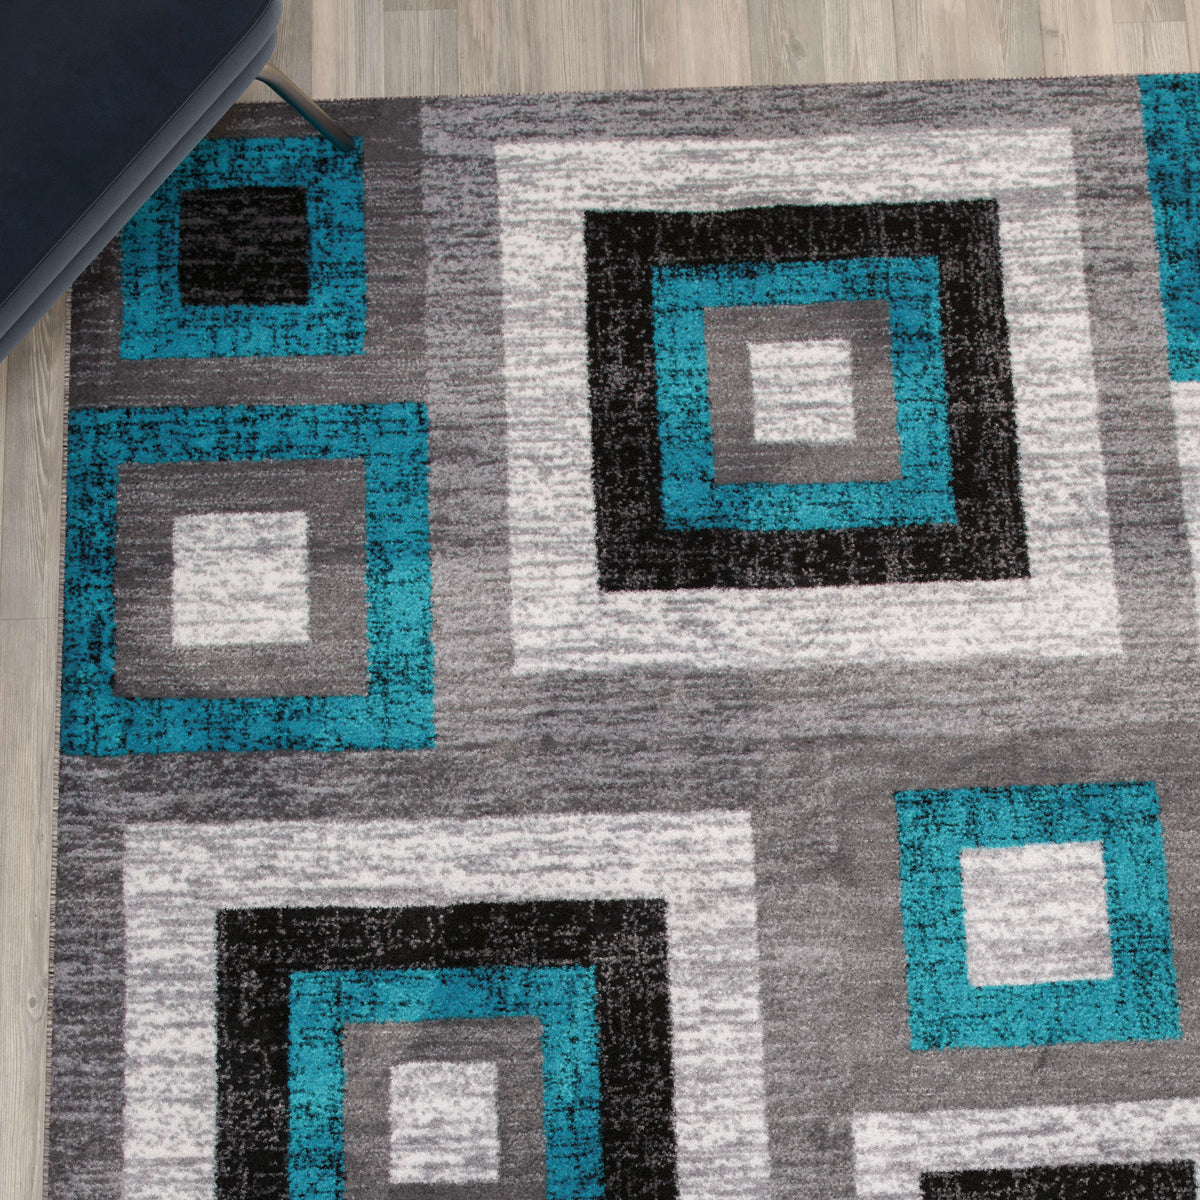 Turquoise,5' x 7' |#| Modern Geometric Design Area Rug in Turquoise, Grey, and White - 5' x 7'